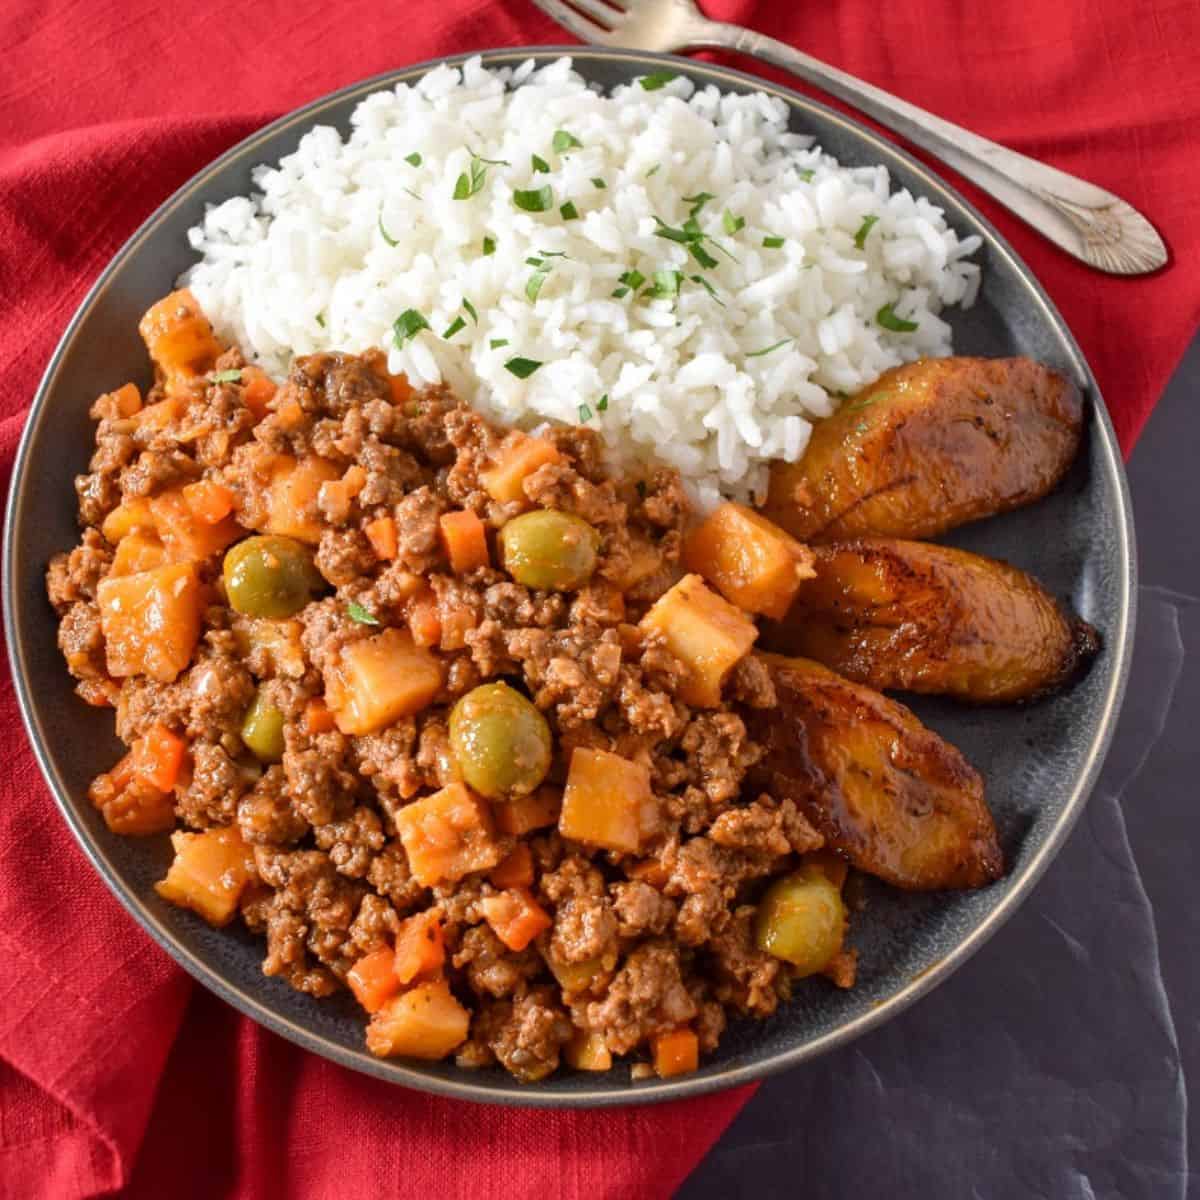 The picadillo served with white rice and fried sweet plantains on a gray plate.